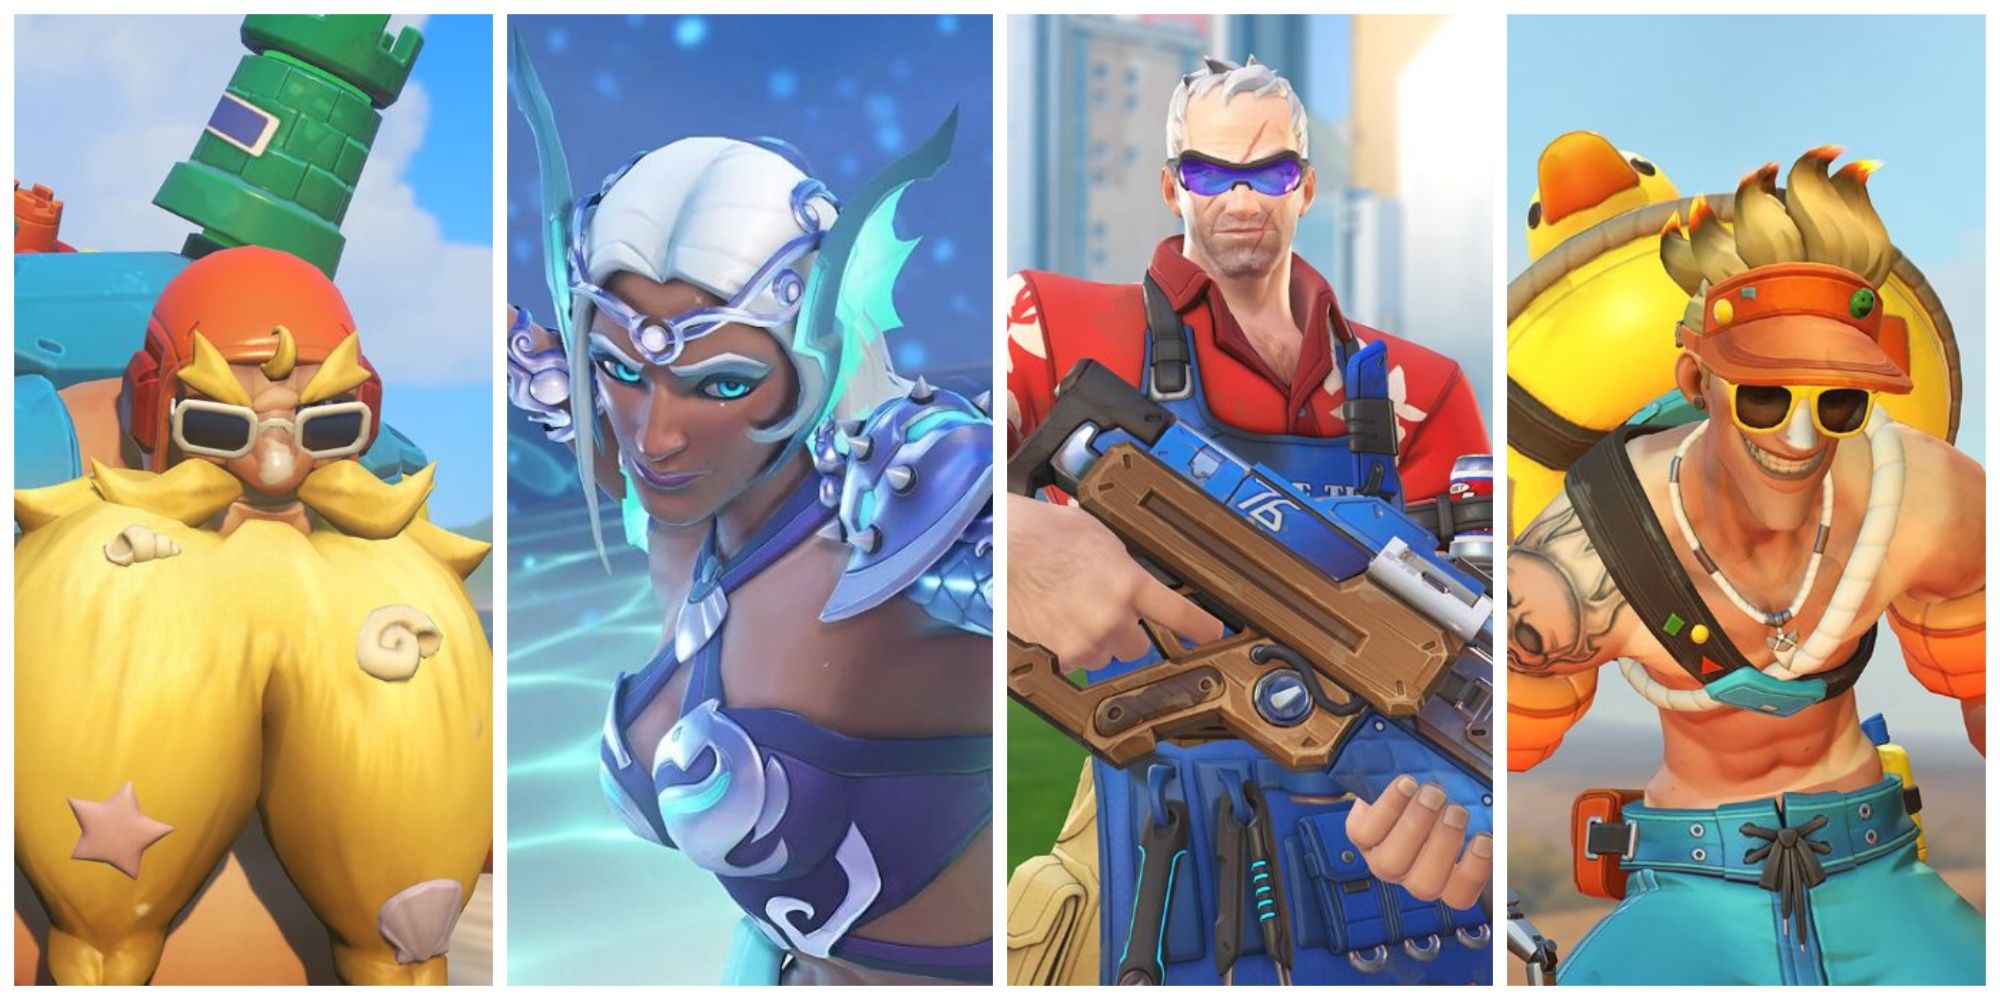 A collage featuring Symmetra, Soldier 76, Junkrat and Torbjorn from Overwatch 2 wearing summer themed skins